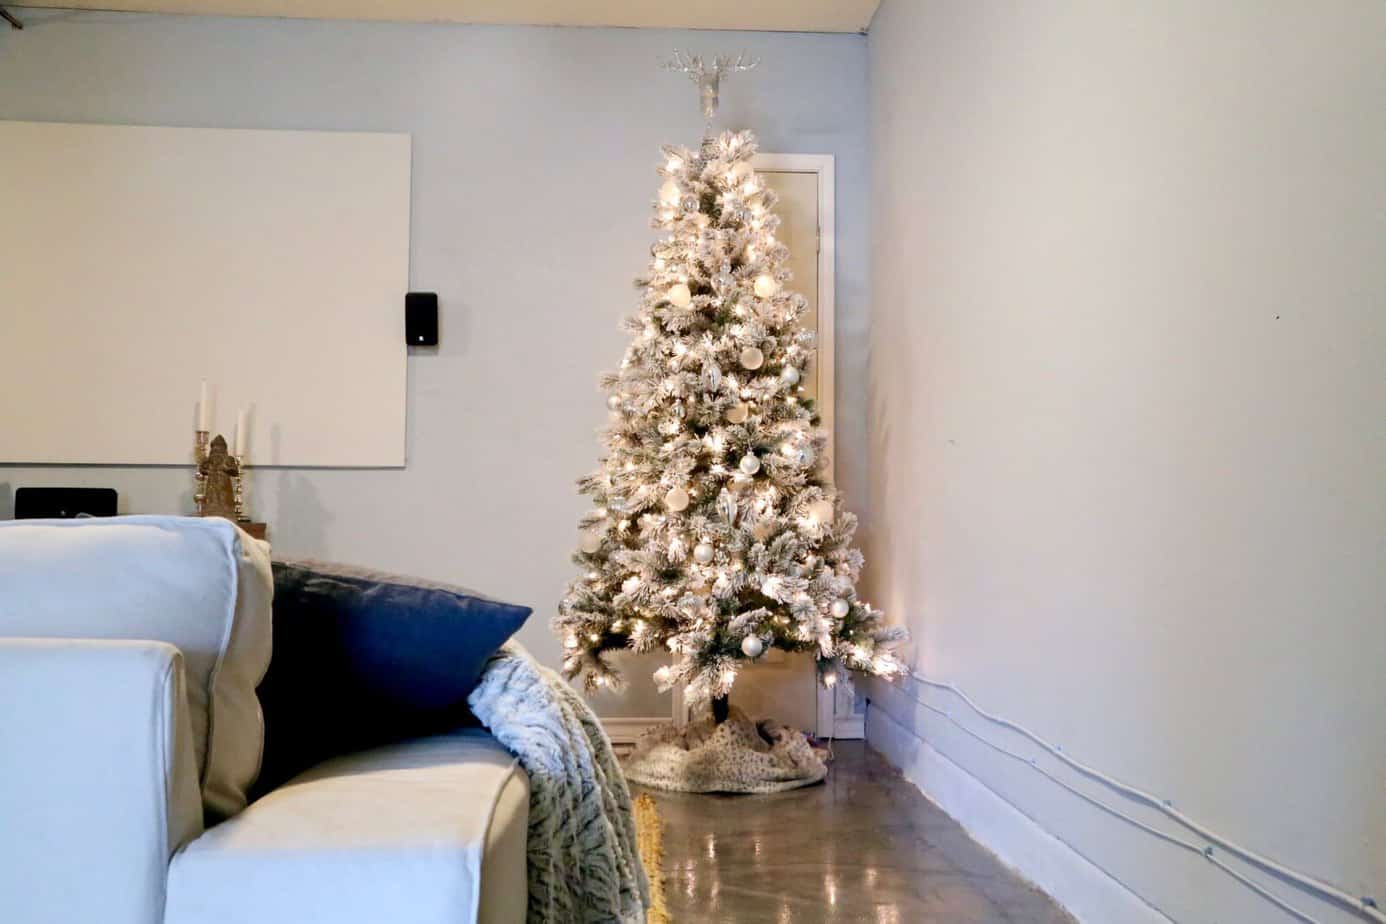 Great tips, tricks, and ideas for decorating for the Christmas season. This tree is so gorgeous and these tips are such a practical way to get your home looking great for Christmas without a ton of effort